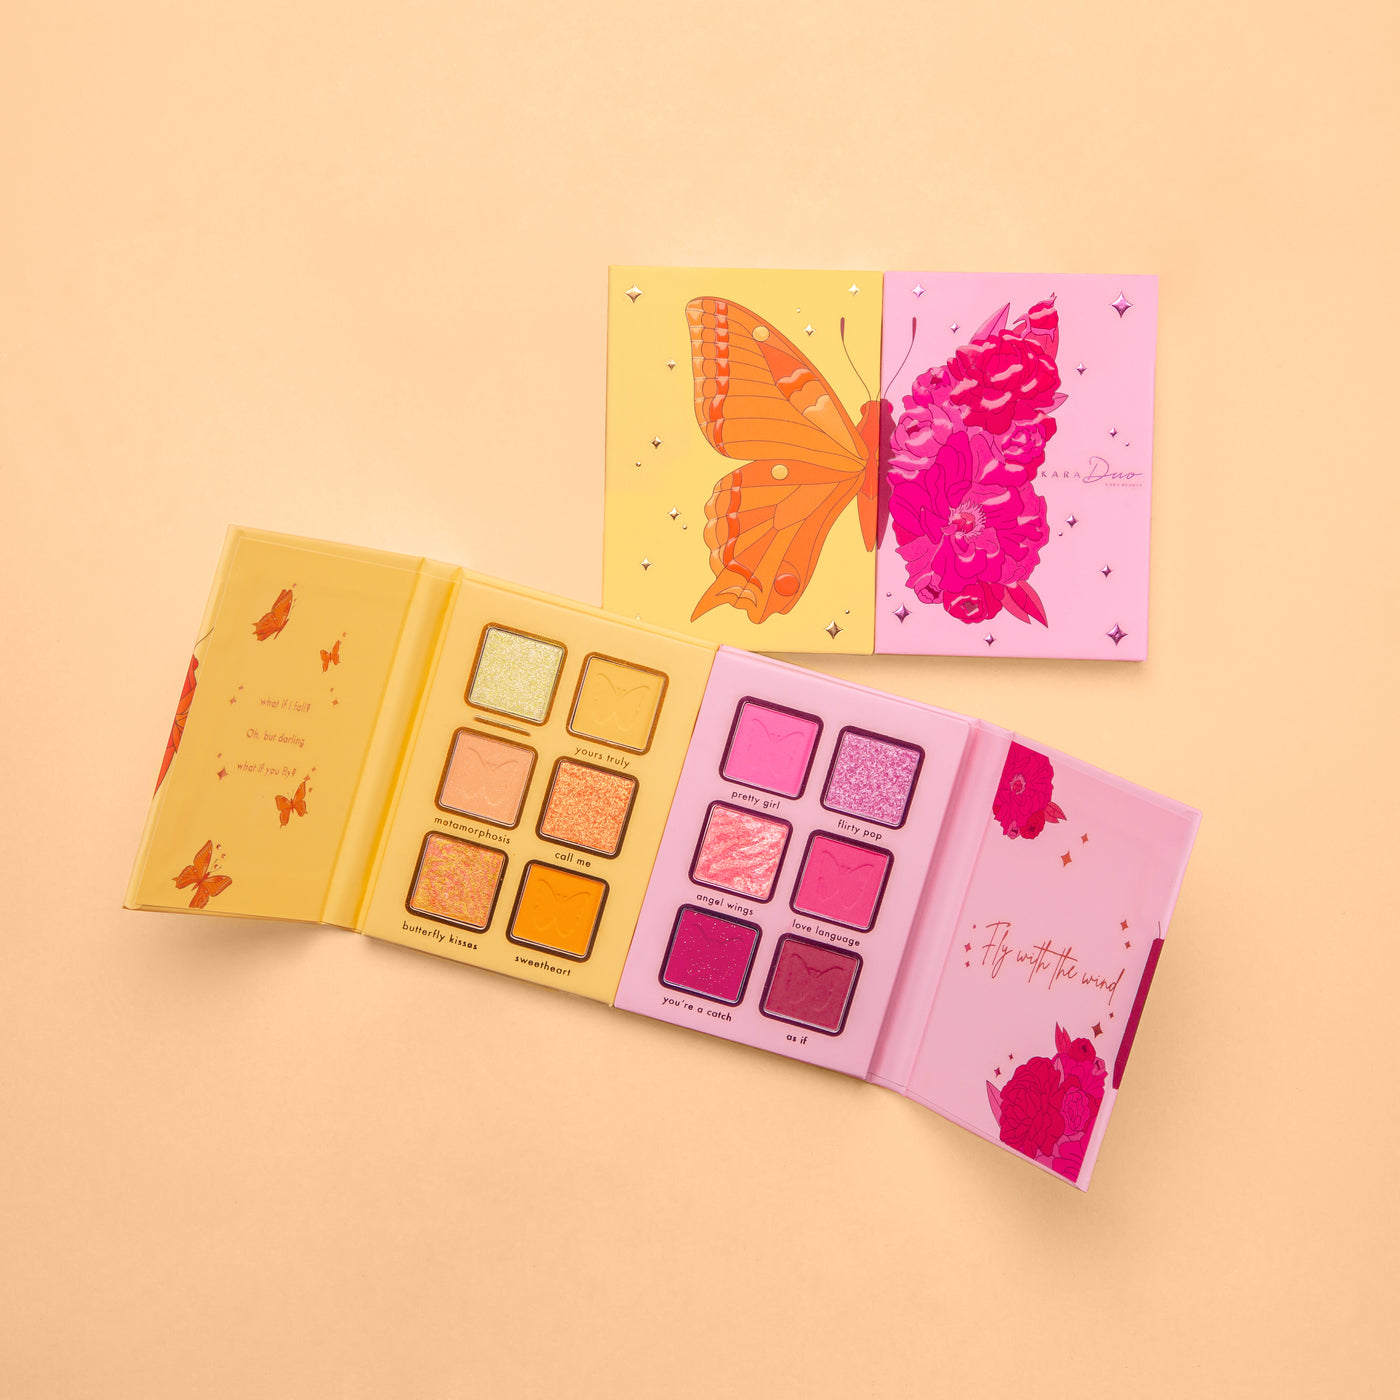 Kara Beauty's Fly with the Wind butterfly theme detachable Vegan eyeshadow palette